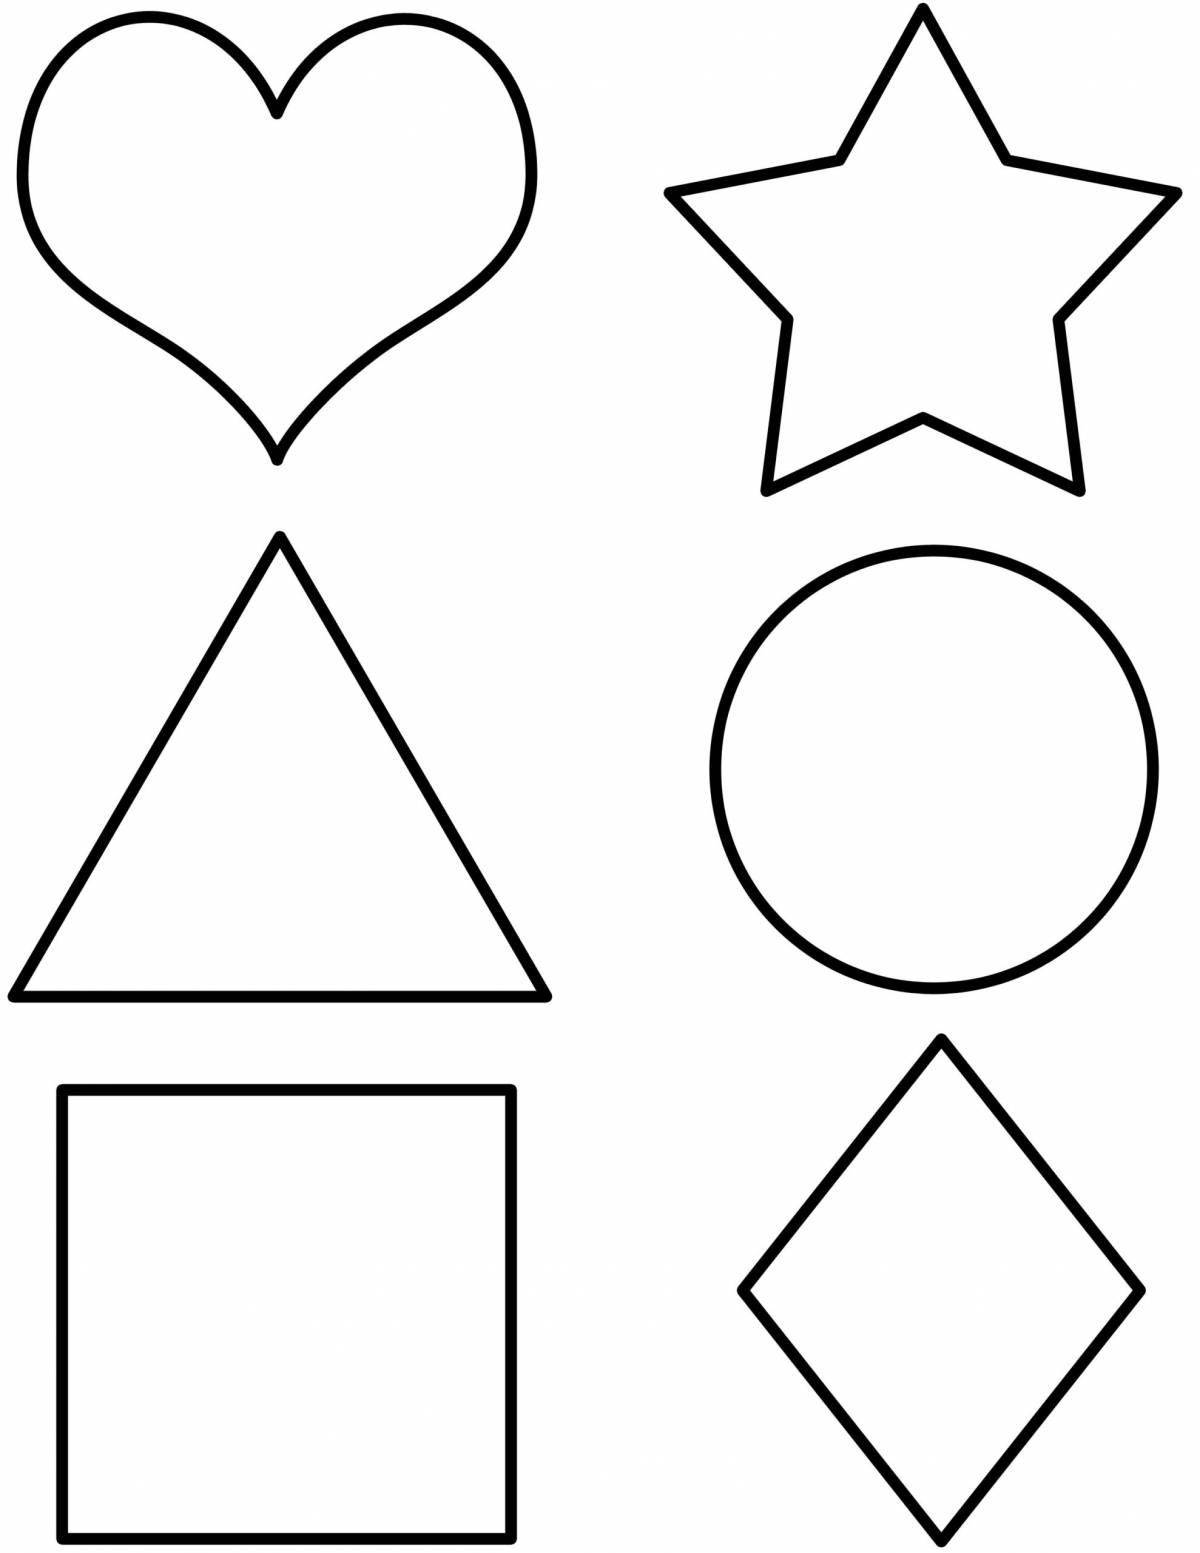 Interesting geometric coloring page for kids